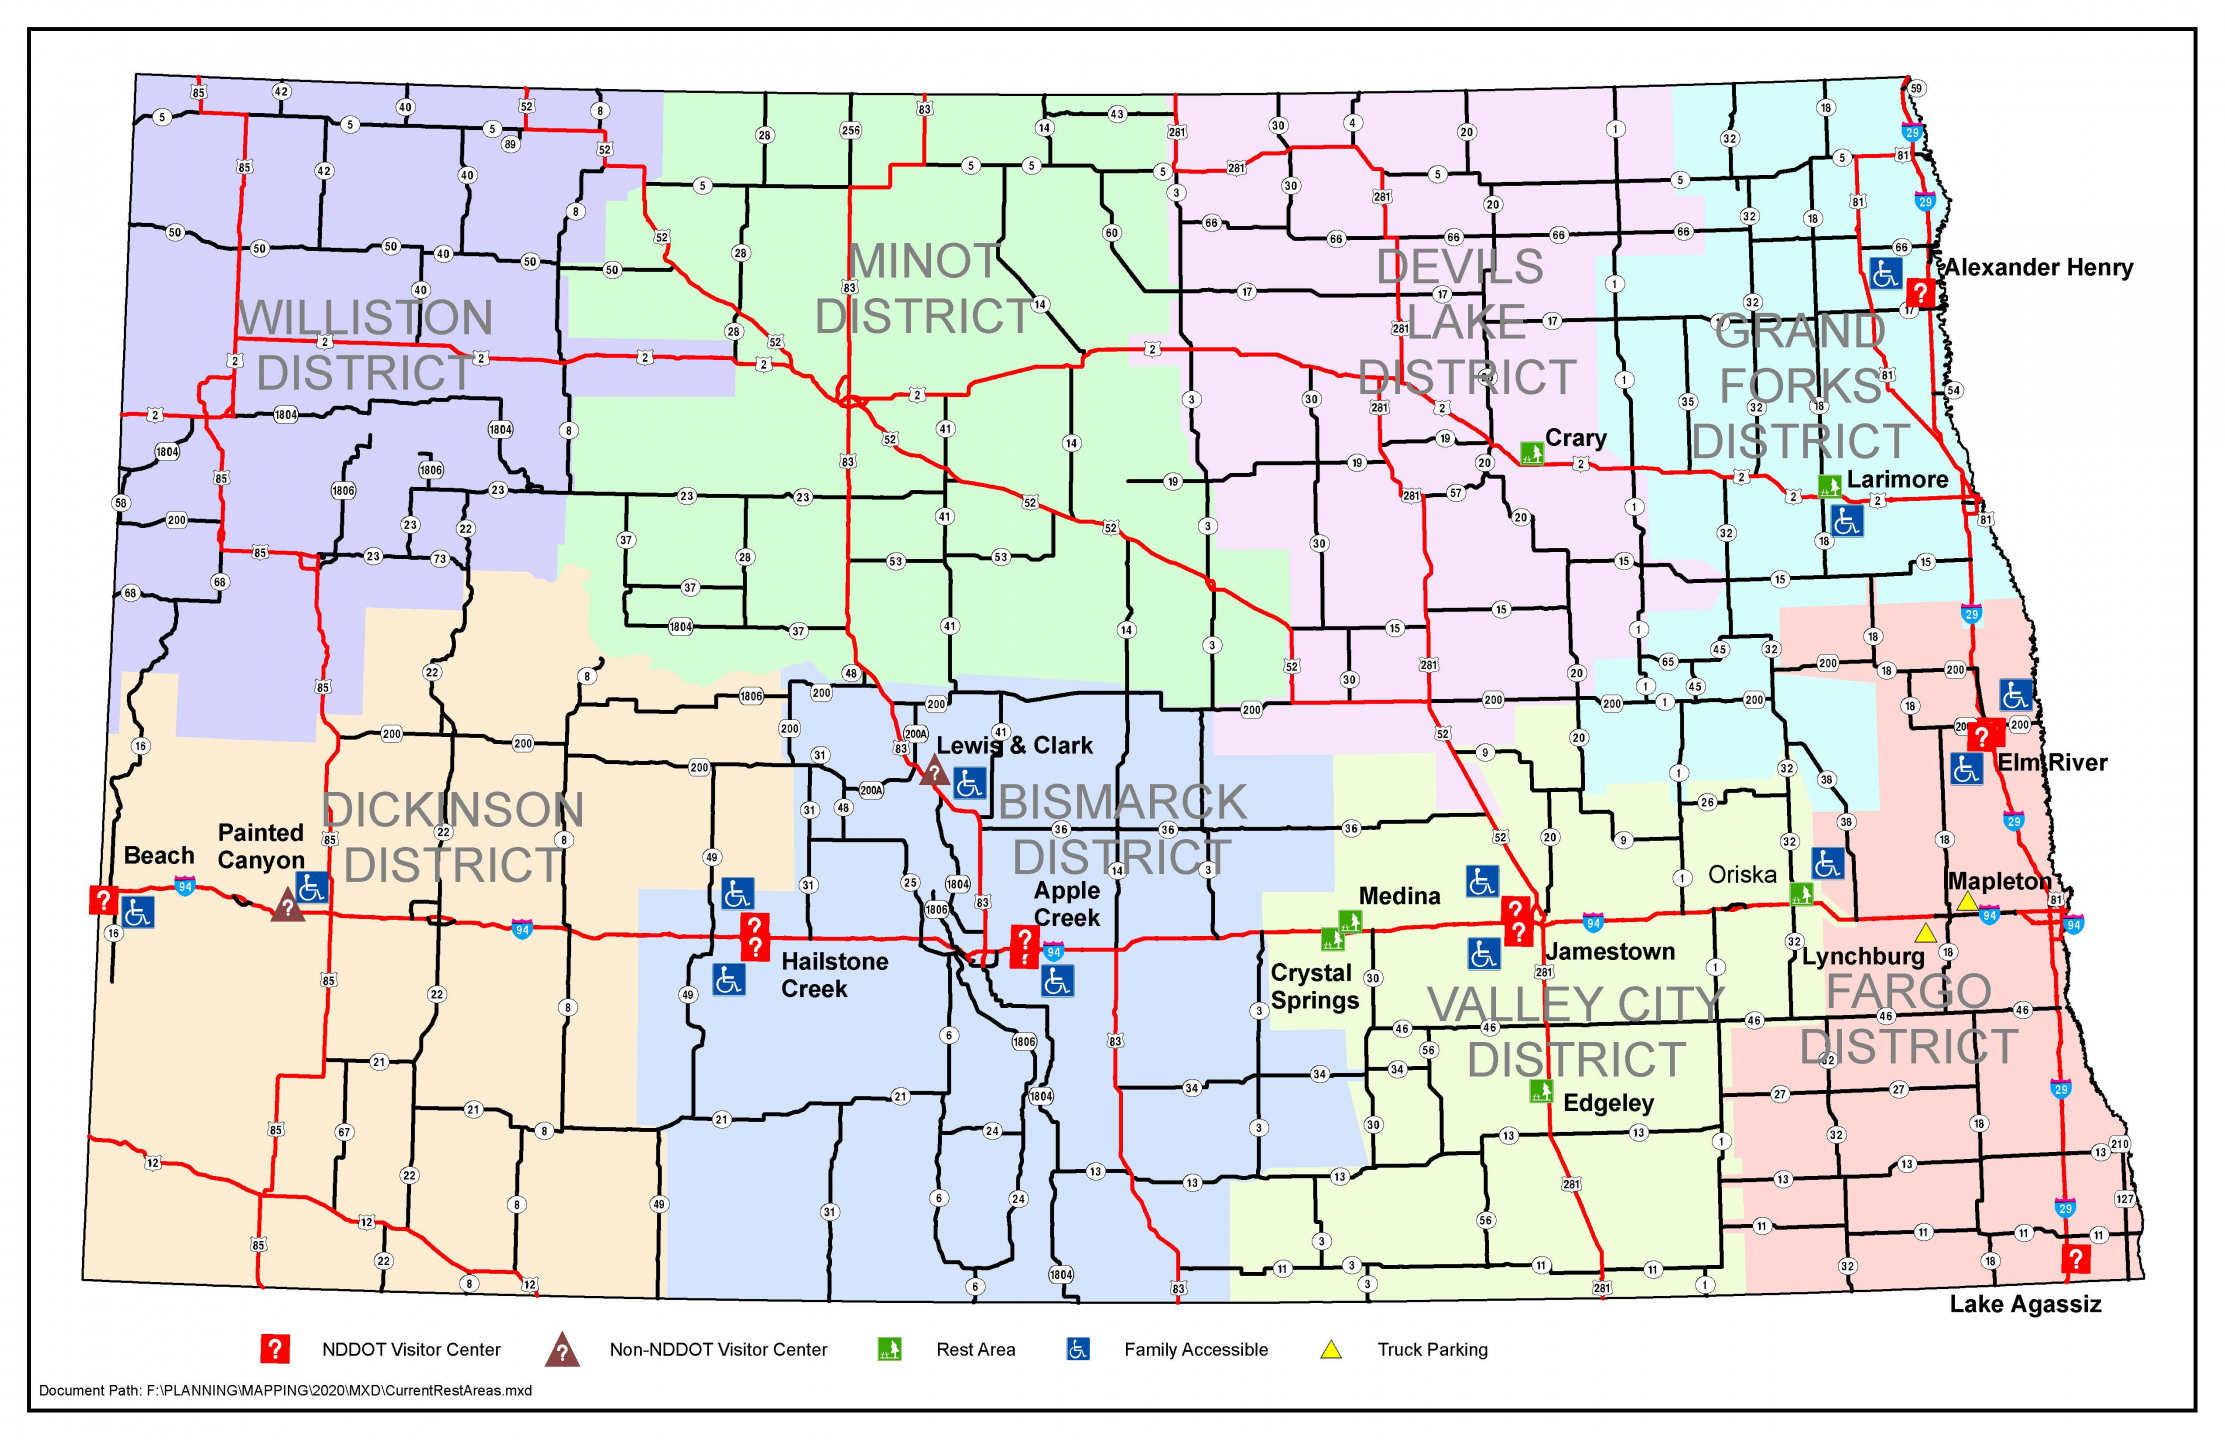 Map of North Dakota detailing its districts and marking rest areas, accessibility, truck parking, etc.